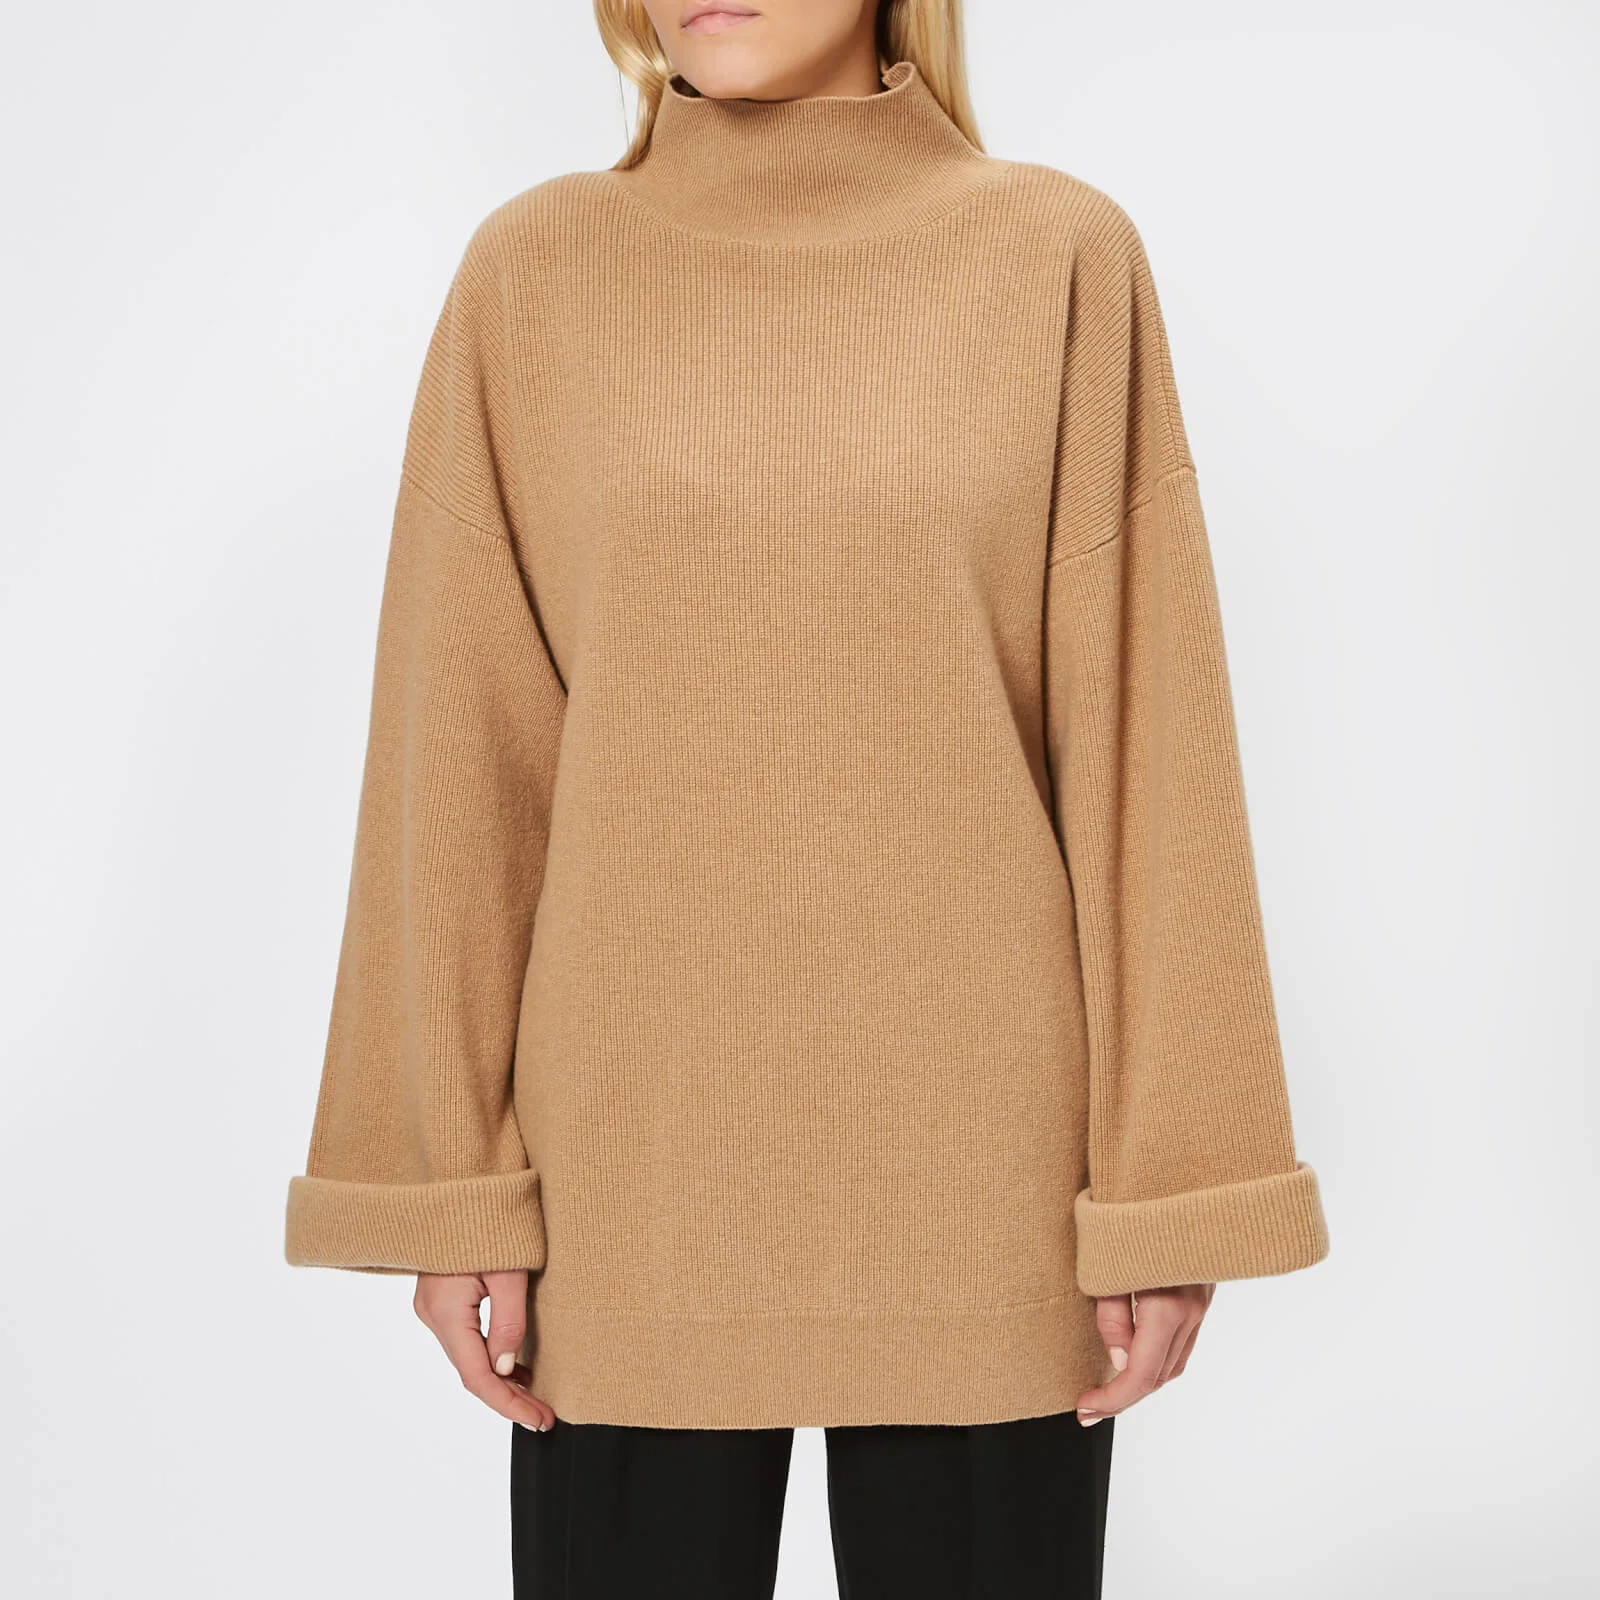 A.P.C. Women's Oversized Knitted Jumper - Camel Image 1